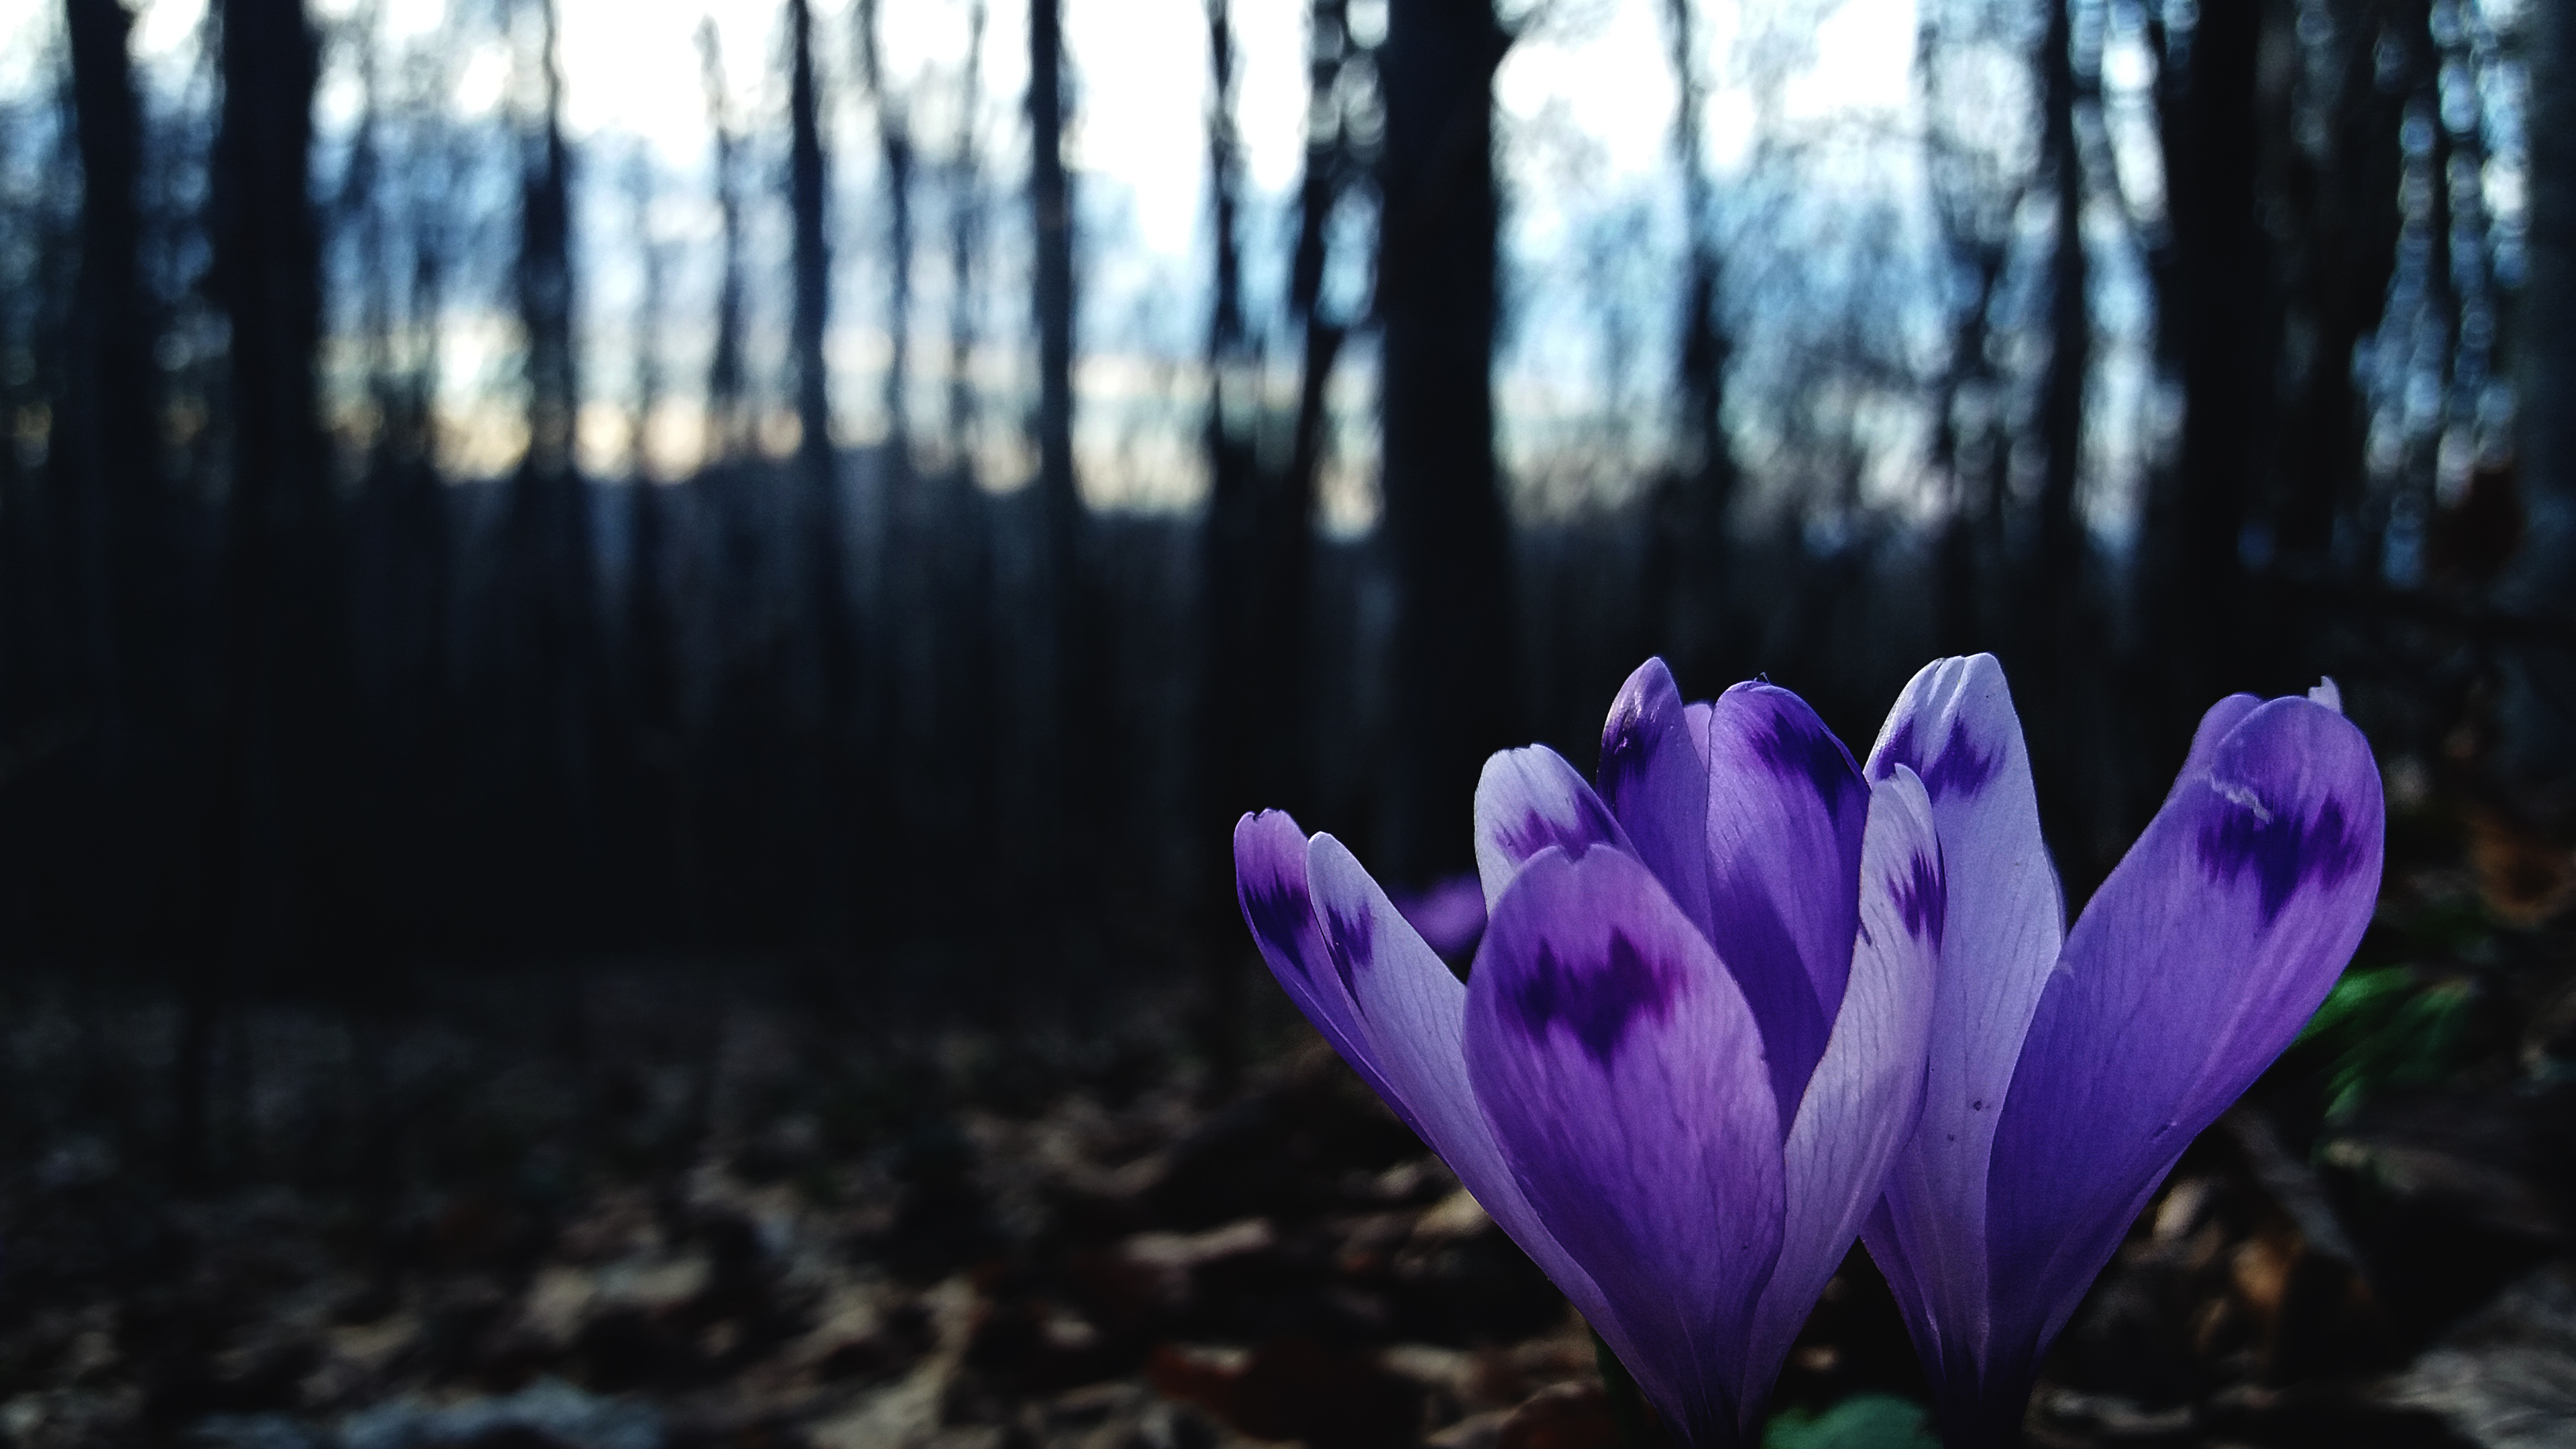 General 3840x2160 nature forest leaves trees beech flowers crocus mountains bokeh spring blurred closeup low light